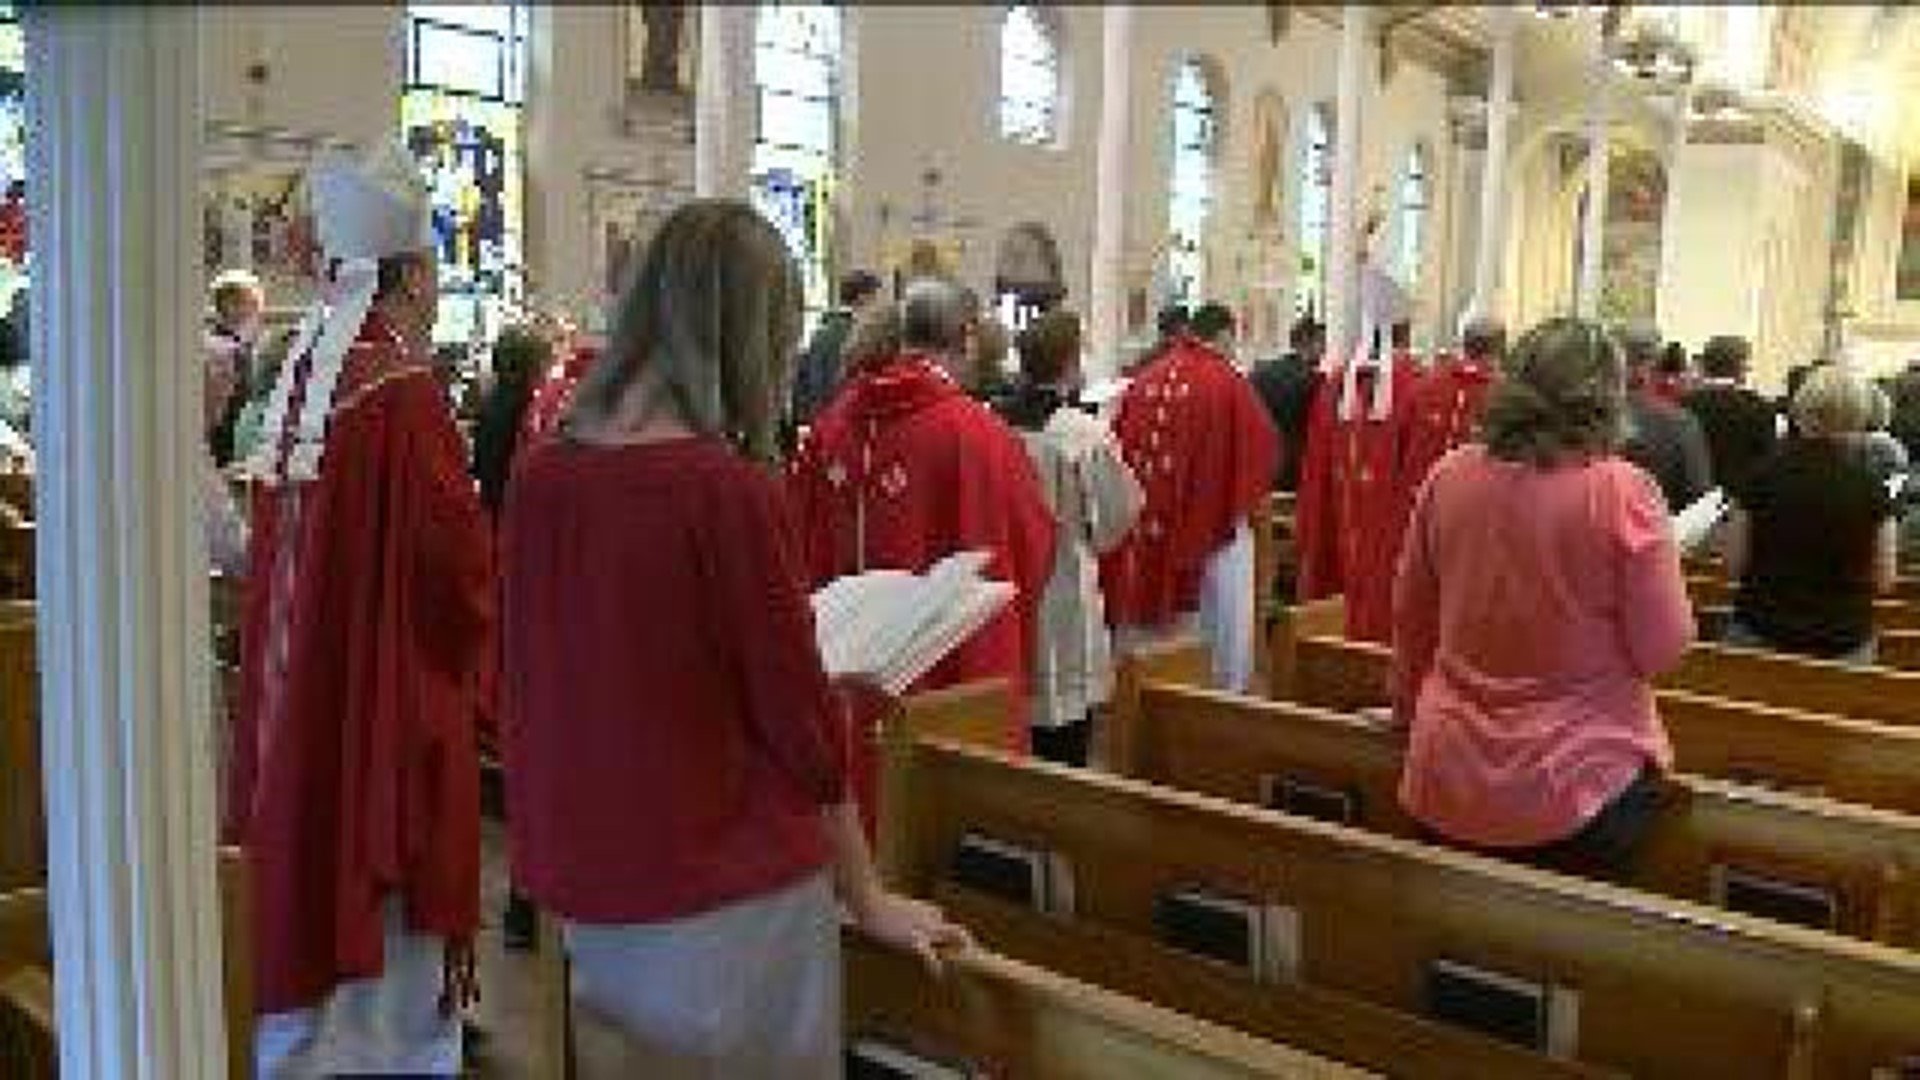 Parishioners React to Diocese Scandals